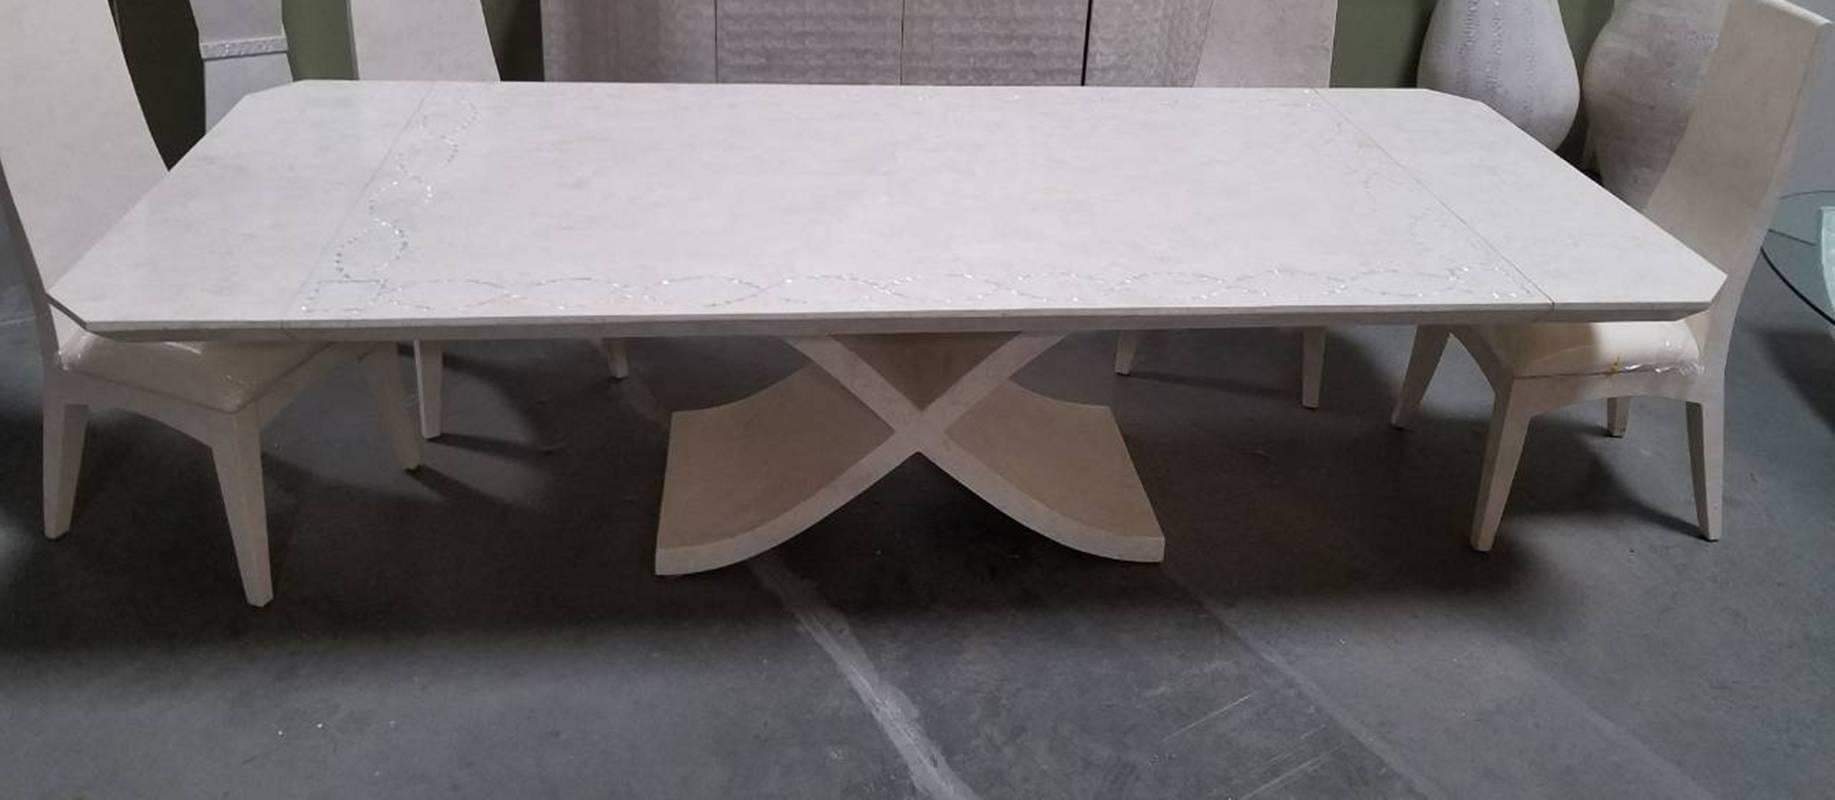 Large X Dining Table in White Tessellated Stone with Trocca Shell Inlay, 1990s For Sale 3